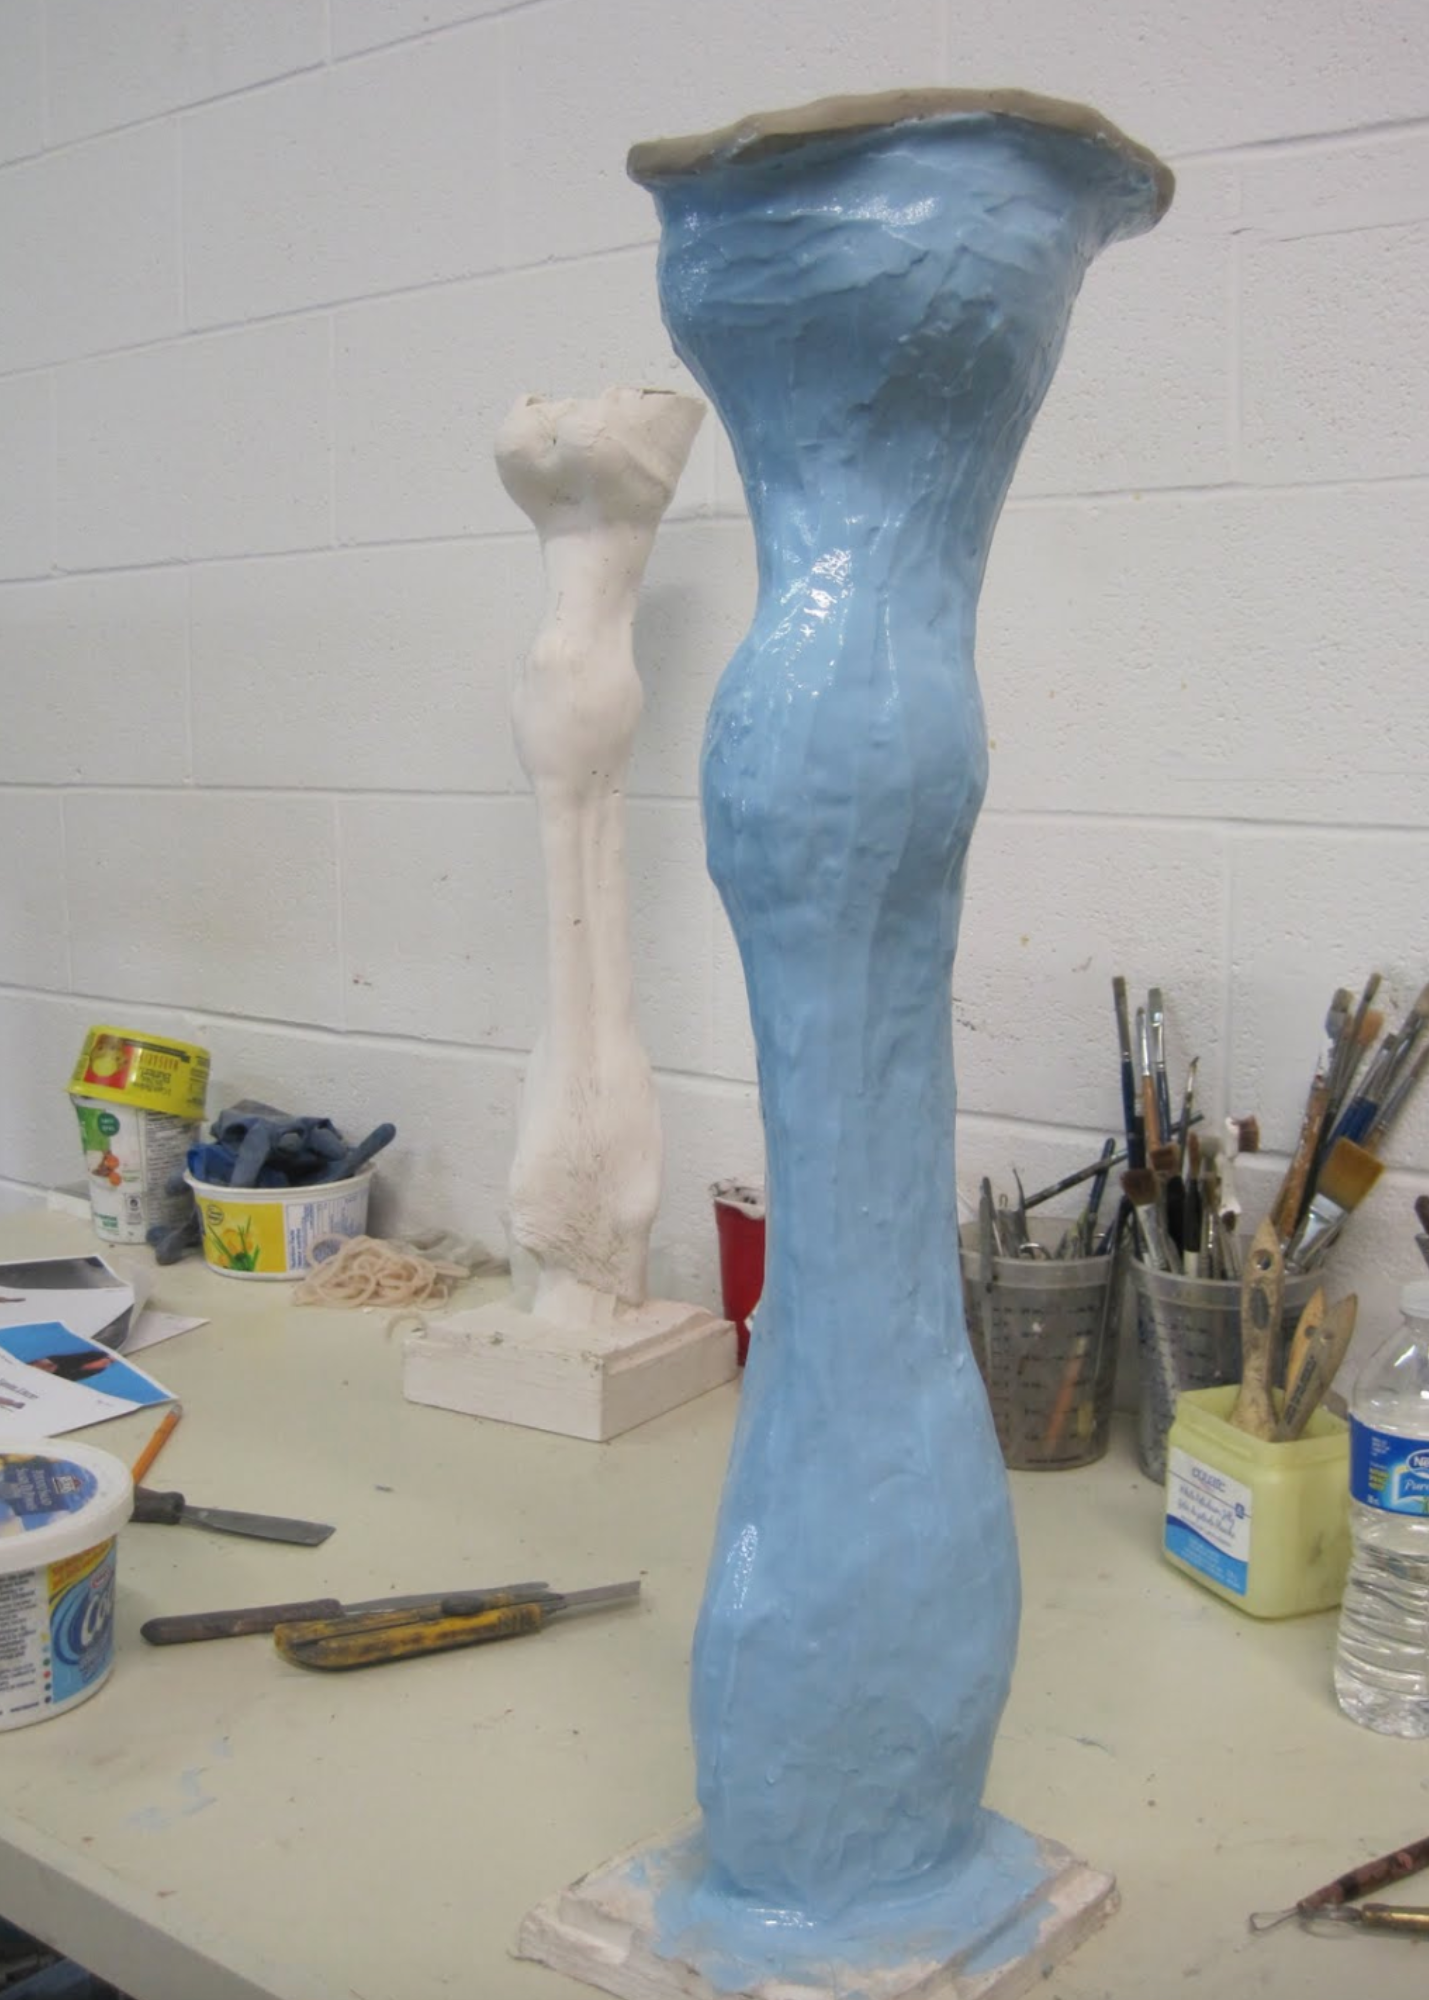  The plaster cast has been repaired and has had several coats of silicone molding material applied.  Once molds of the exterior of the leg have been completed we will begin molding the skeletal structures. Once cast, the bones will then be articulate